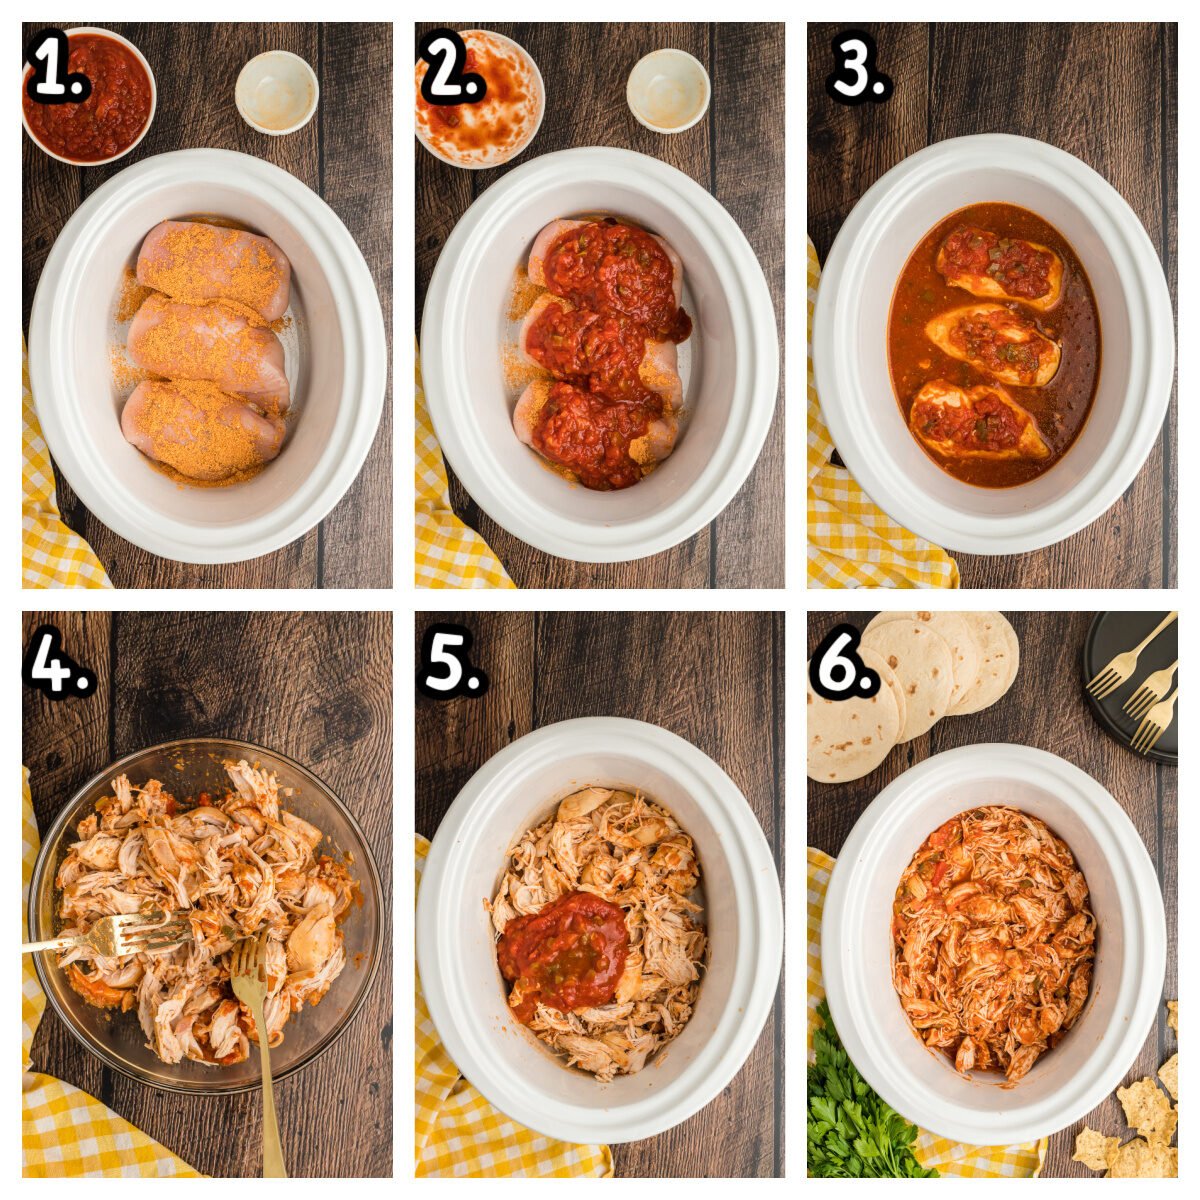 6 images showing how to make salsa chicken in a crockpot.